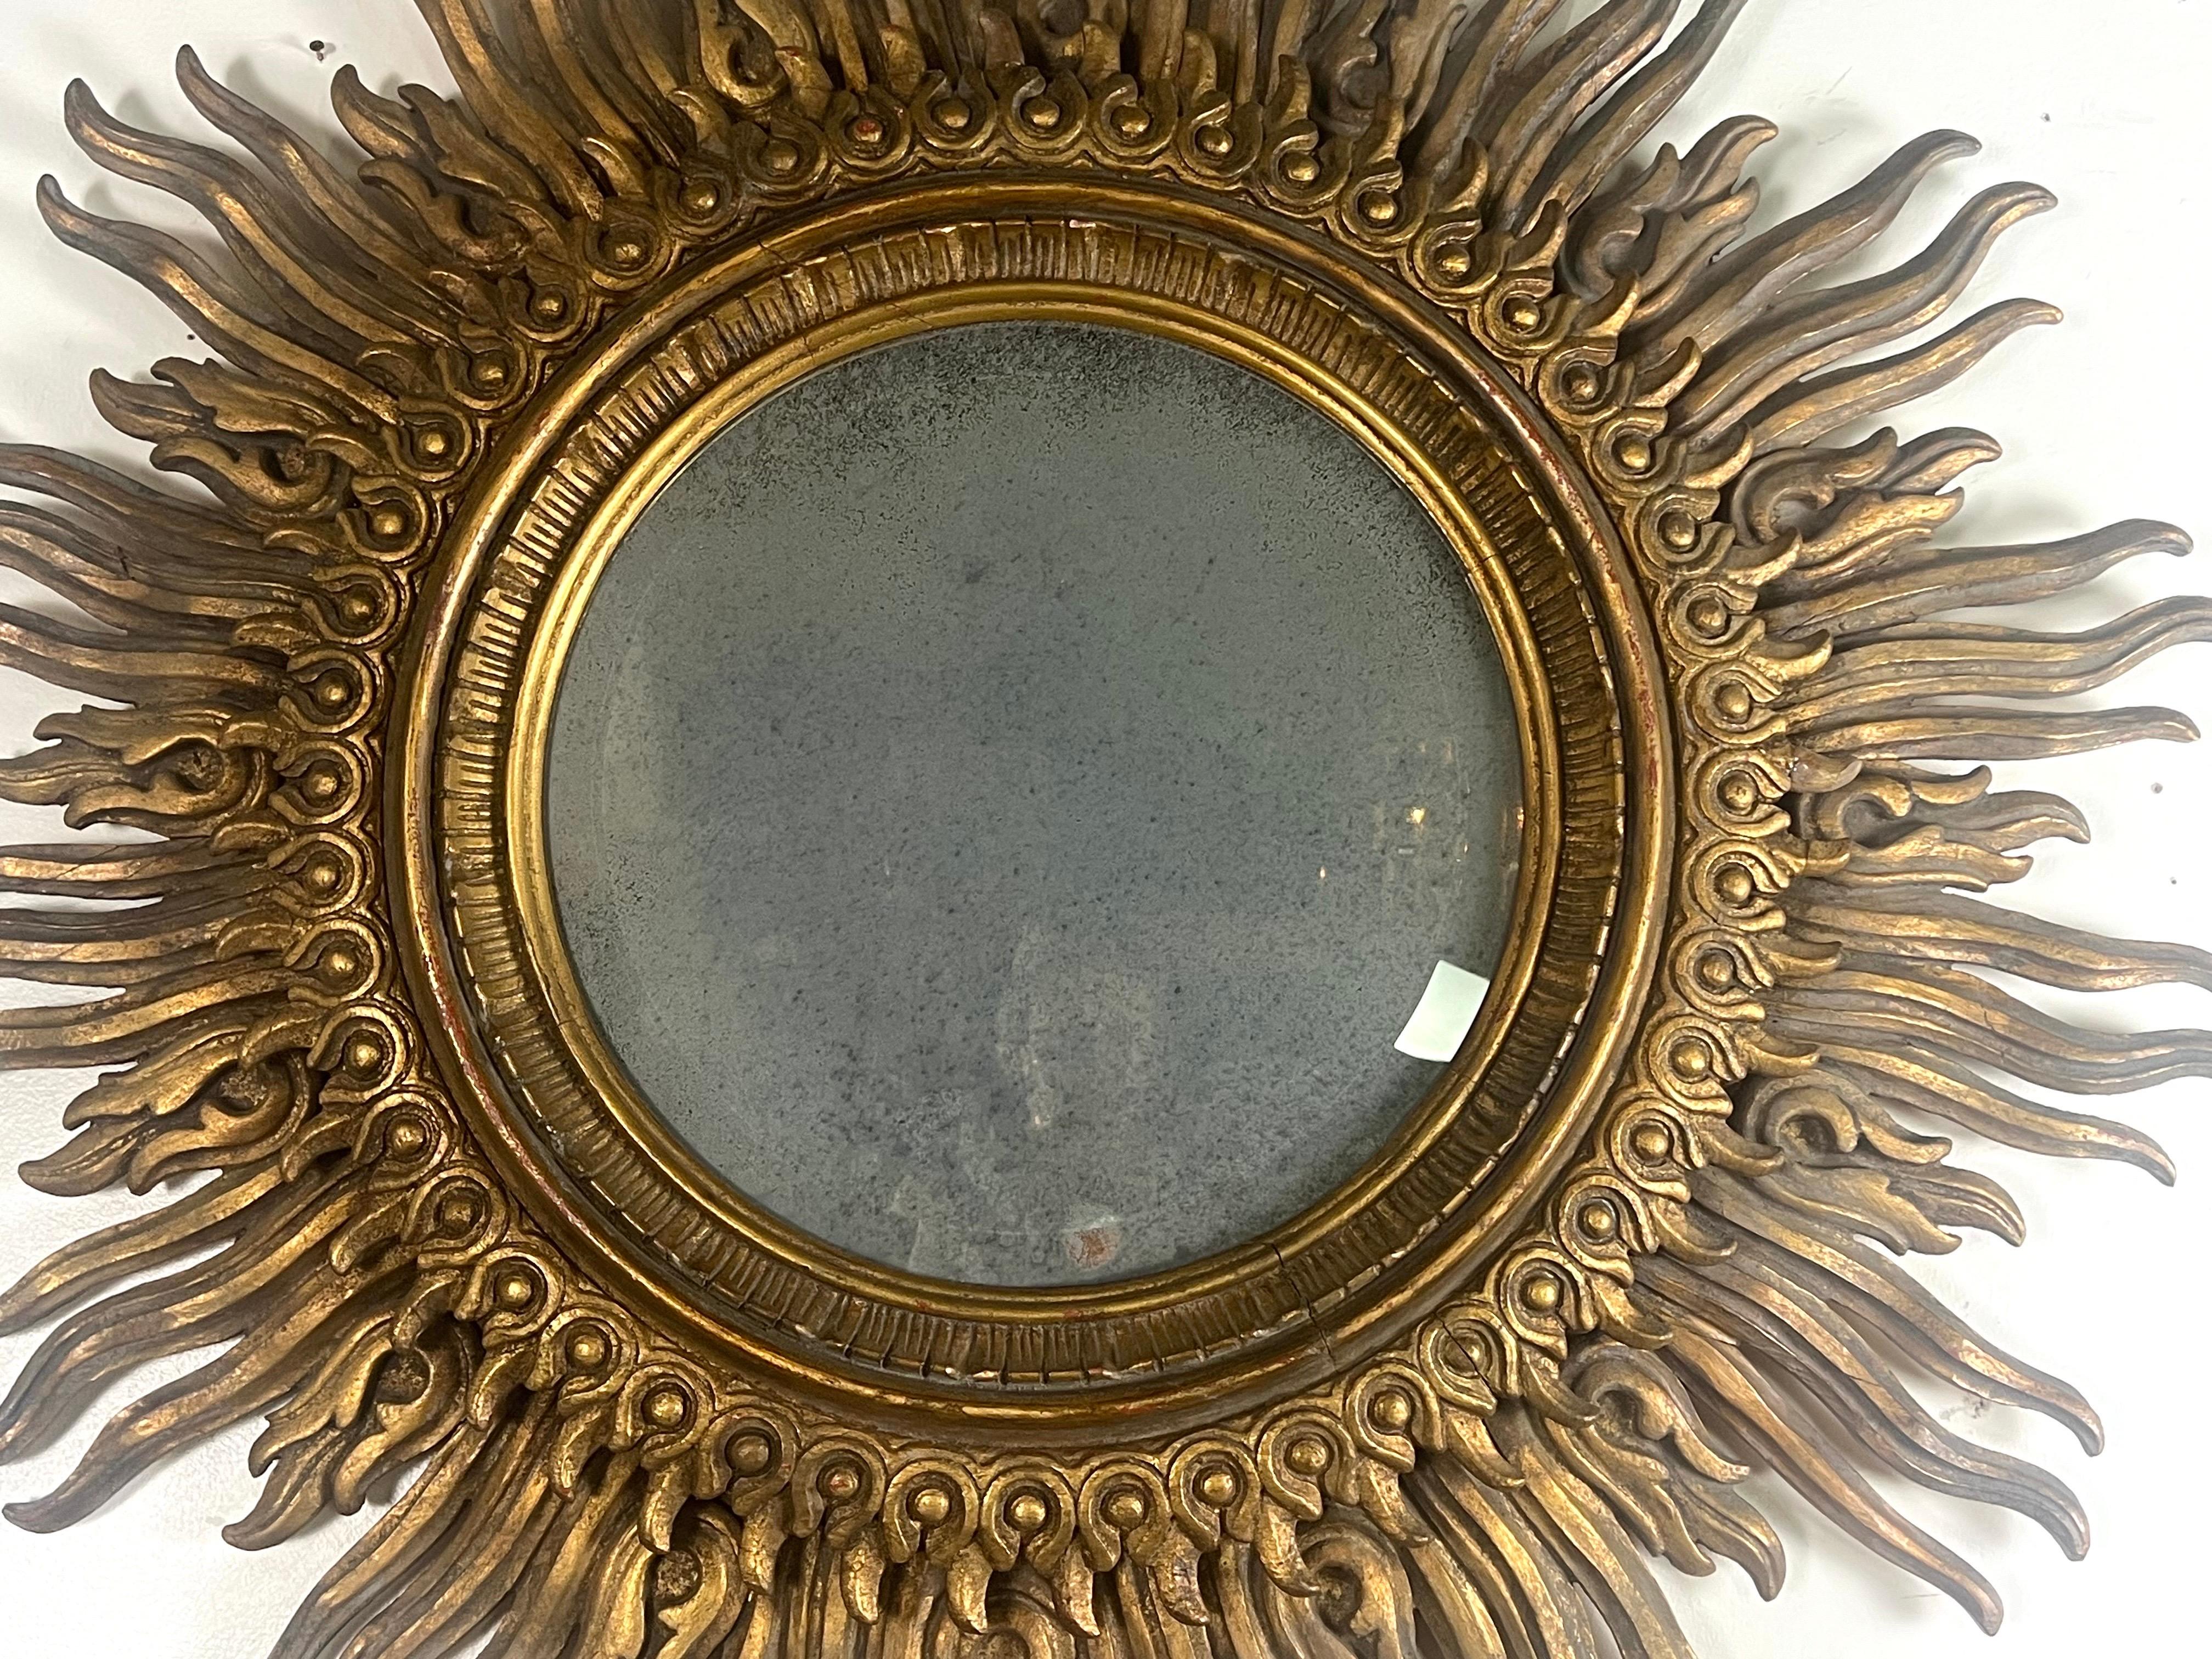 This Italian giltwood sunburst mirror, monumental in scale, is an exquisite piece that captures the lavishness and artistry of Italian craftsmanship.  The mirror features a central glass panel that is beautifully antiqued, giving it a vintage charm